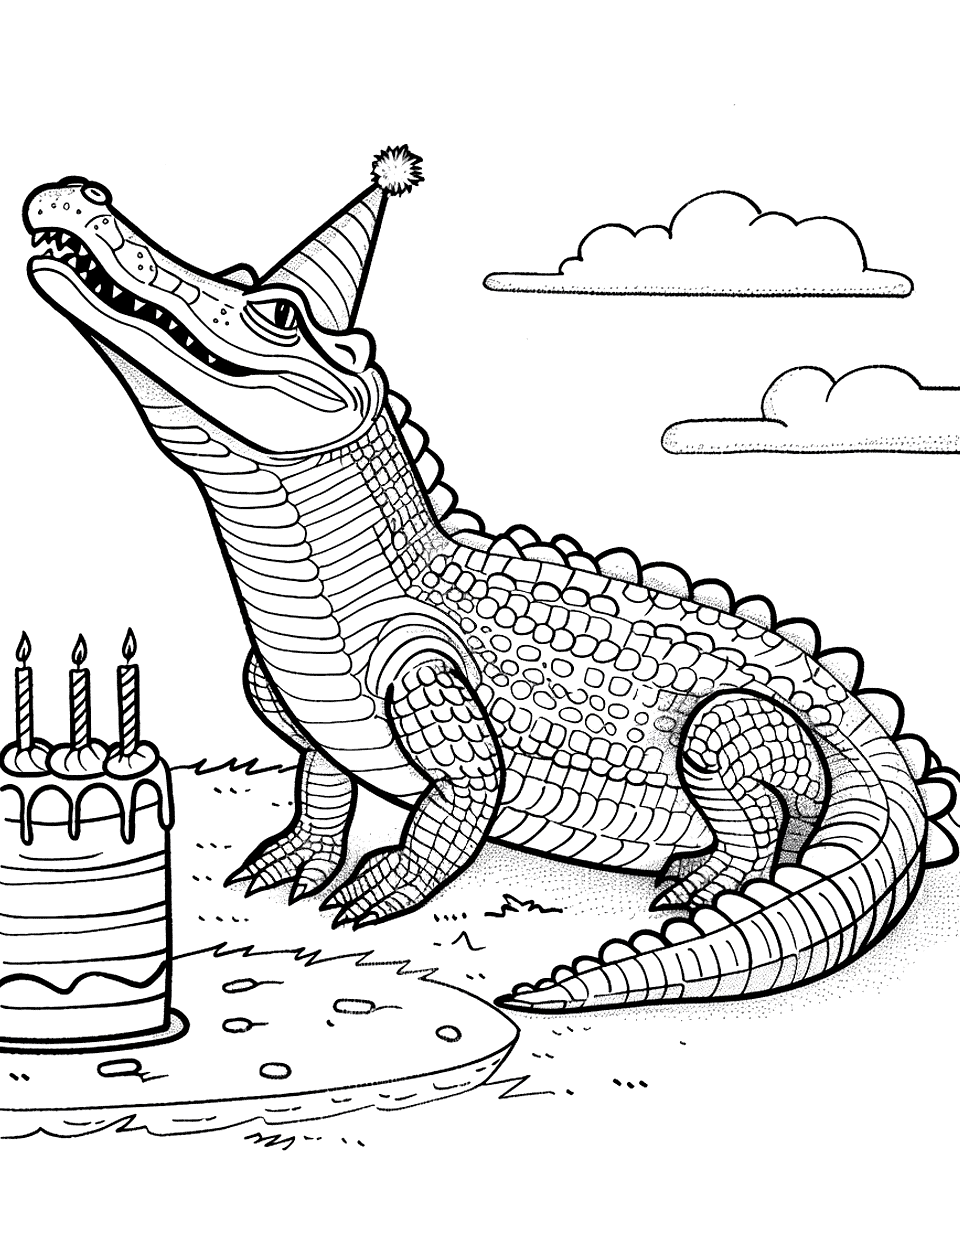 Crocodile's Birthday Party Crocodile Coloring Page - A festive scene with a crocodile wearing a party hat next to a cake.